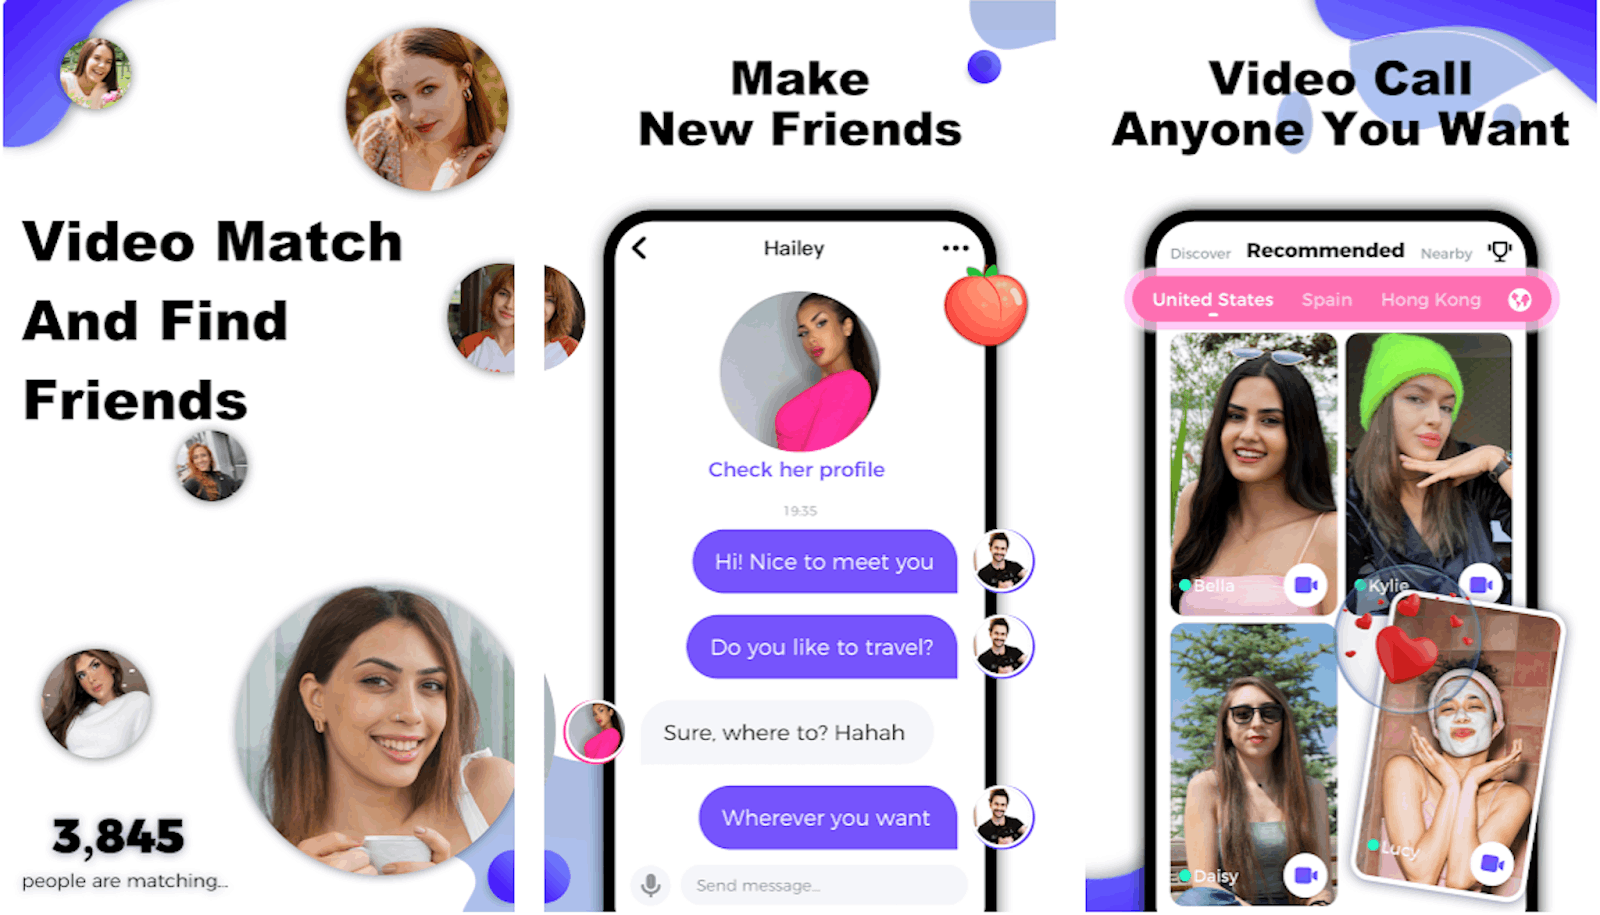 CuteU - An App to Connect with Friends